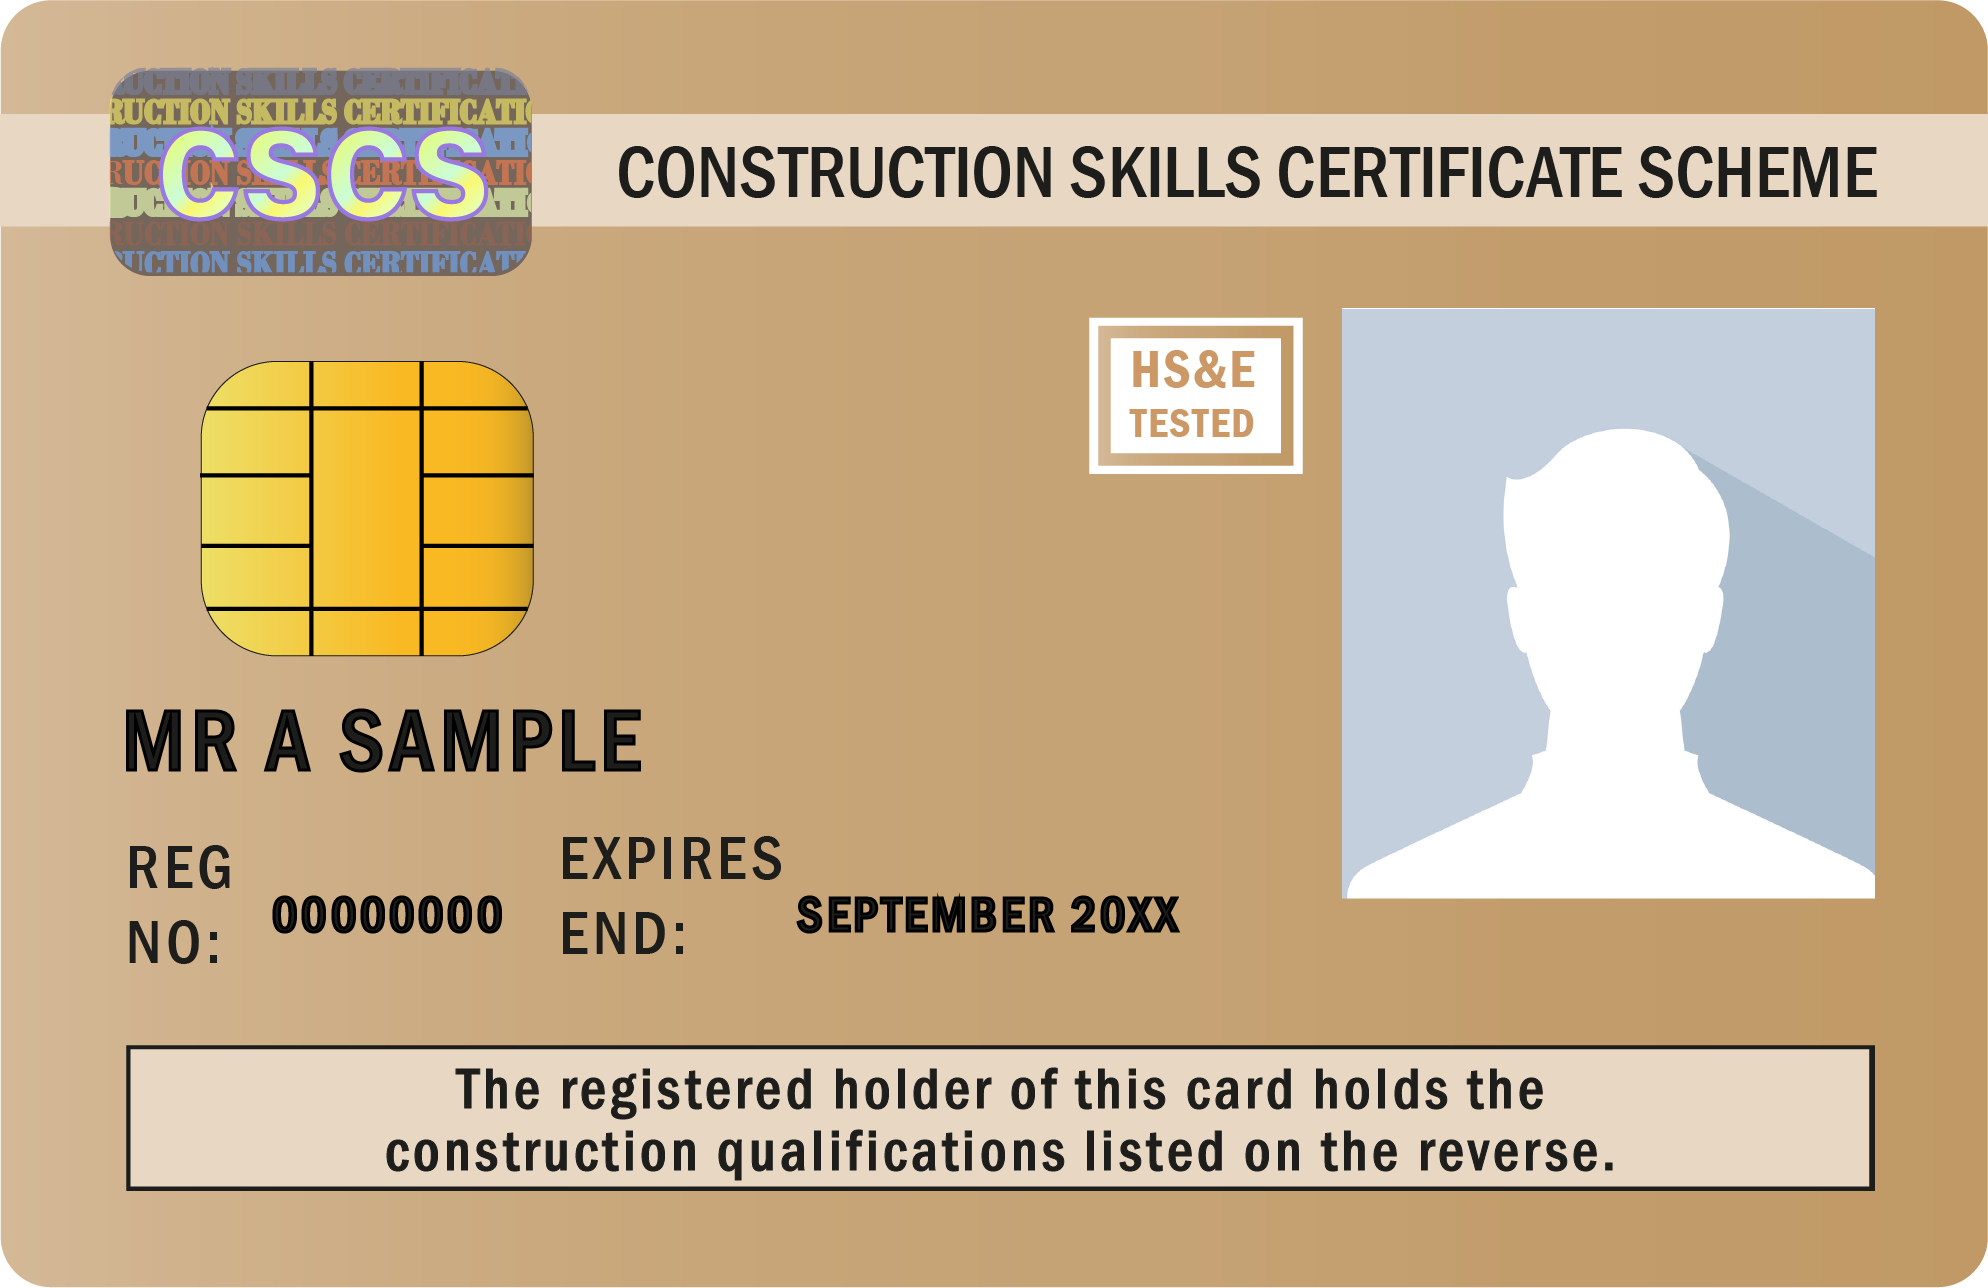 image shows CSCS Supervisory card